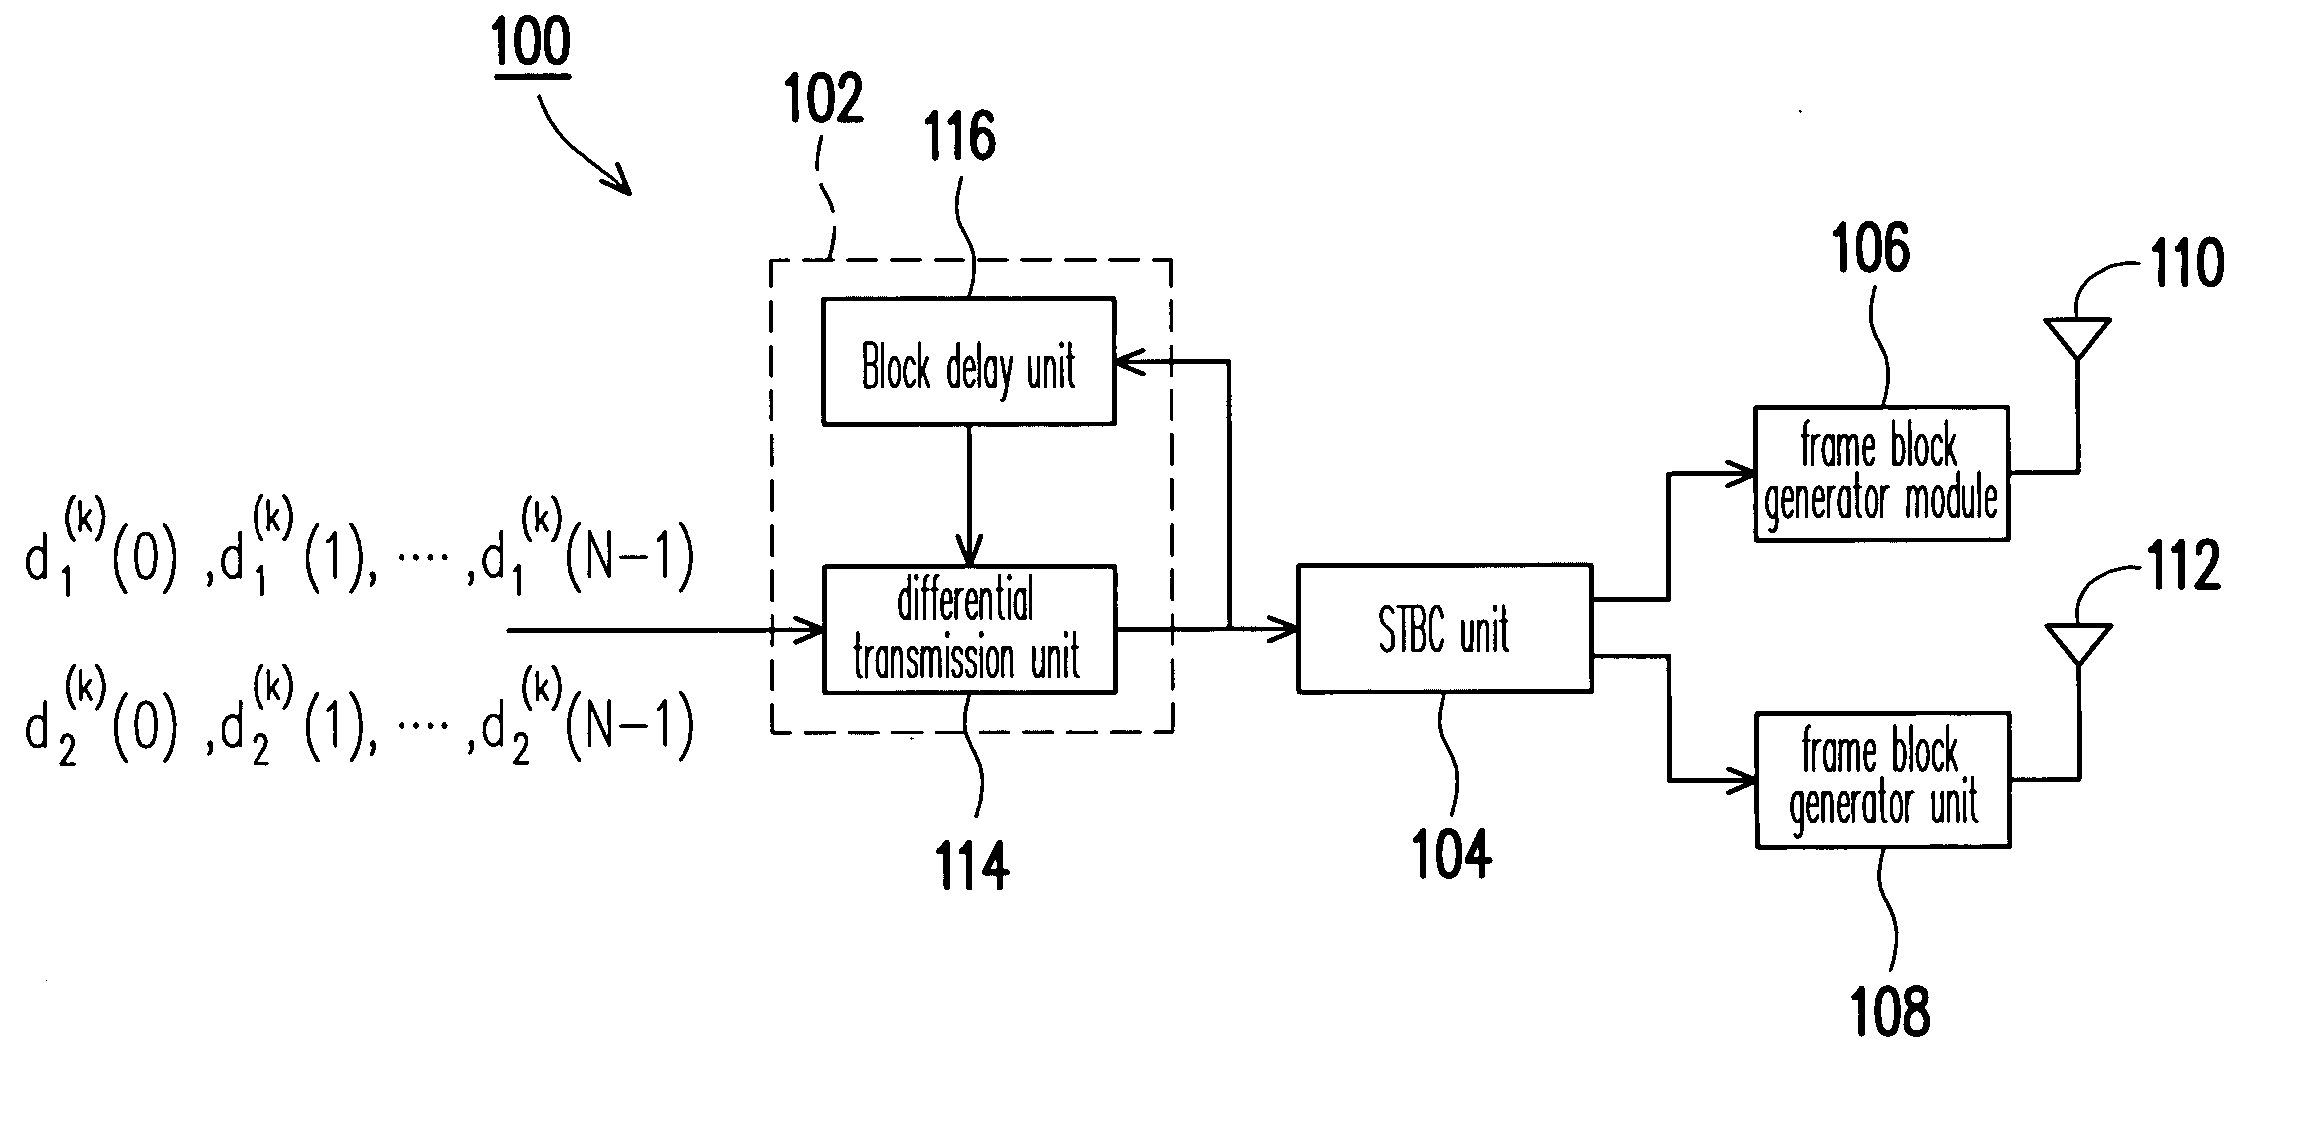 Equipment and method for MIMO SC-FED communication system